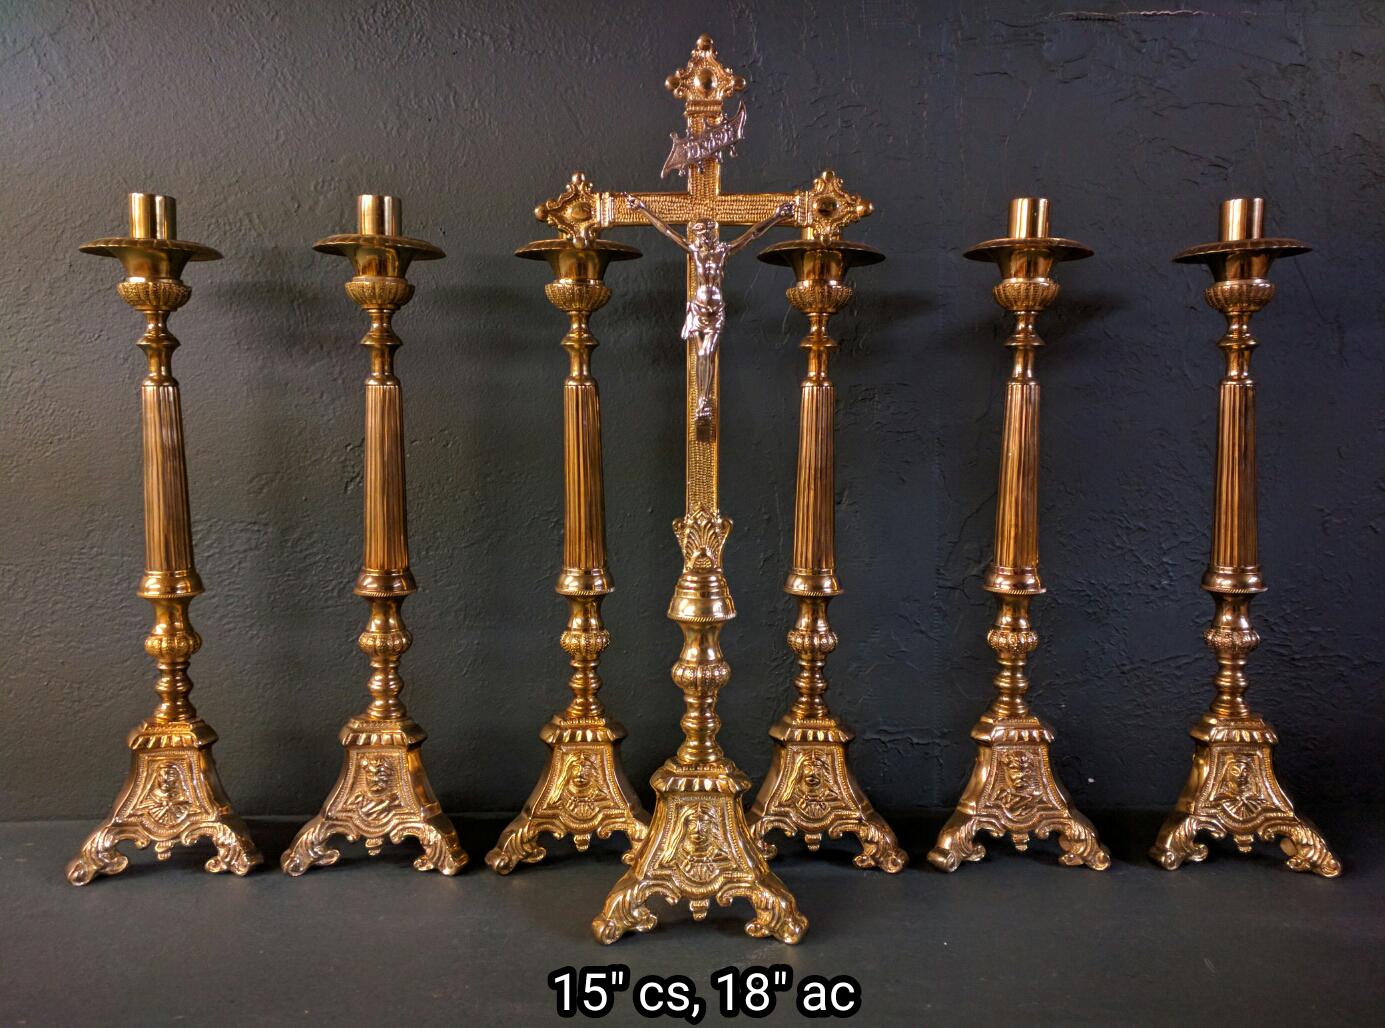 5 1/2 In Brass Ornate Sanctuary Votive Candle Holder for Church Supplies Details about   N.G 